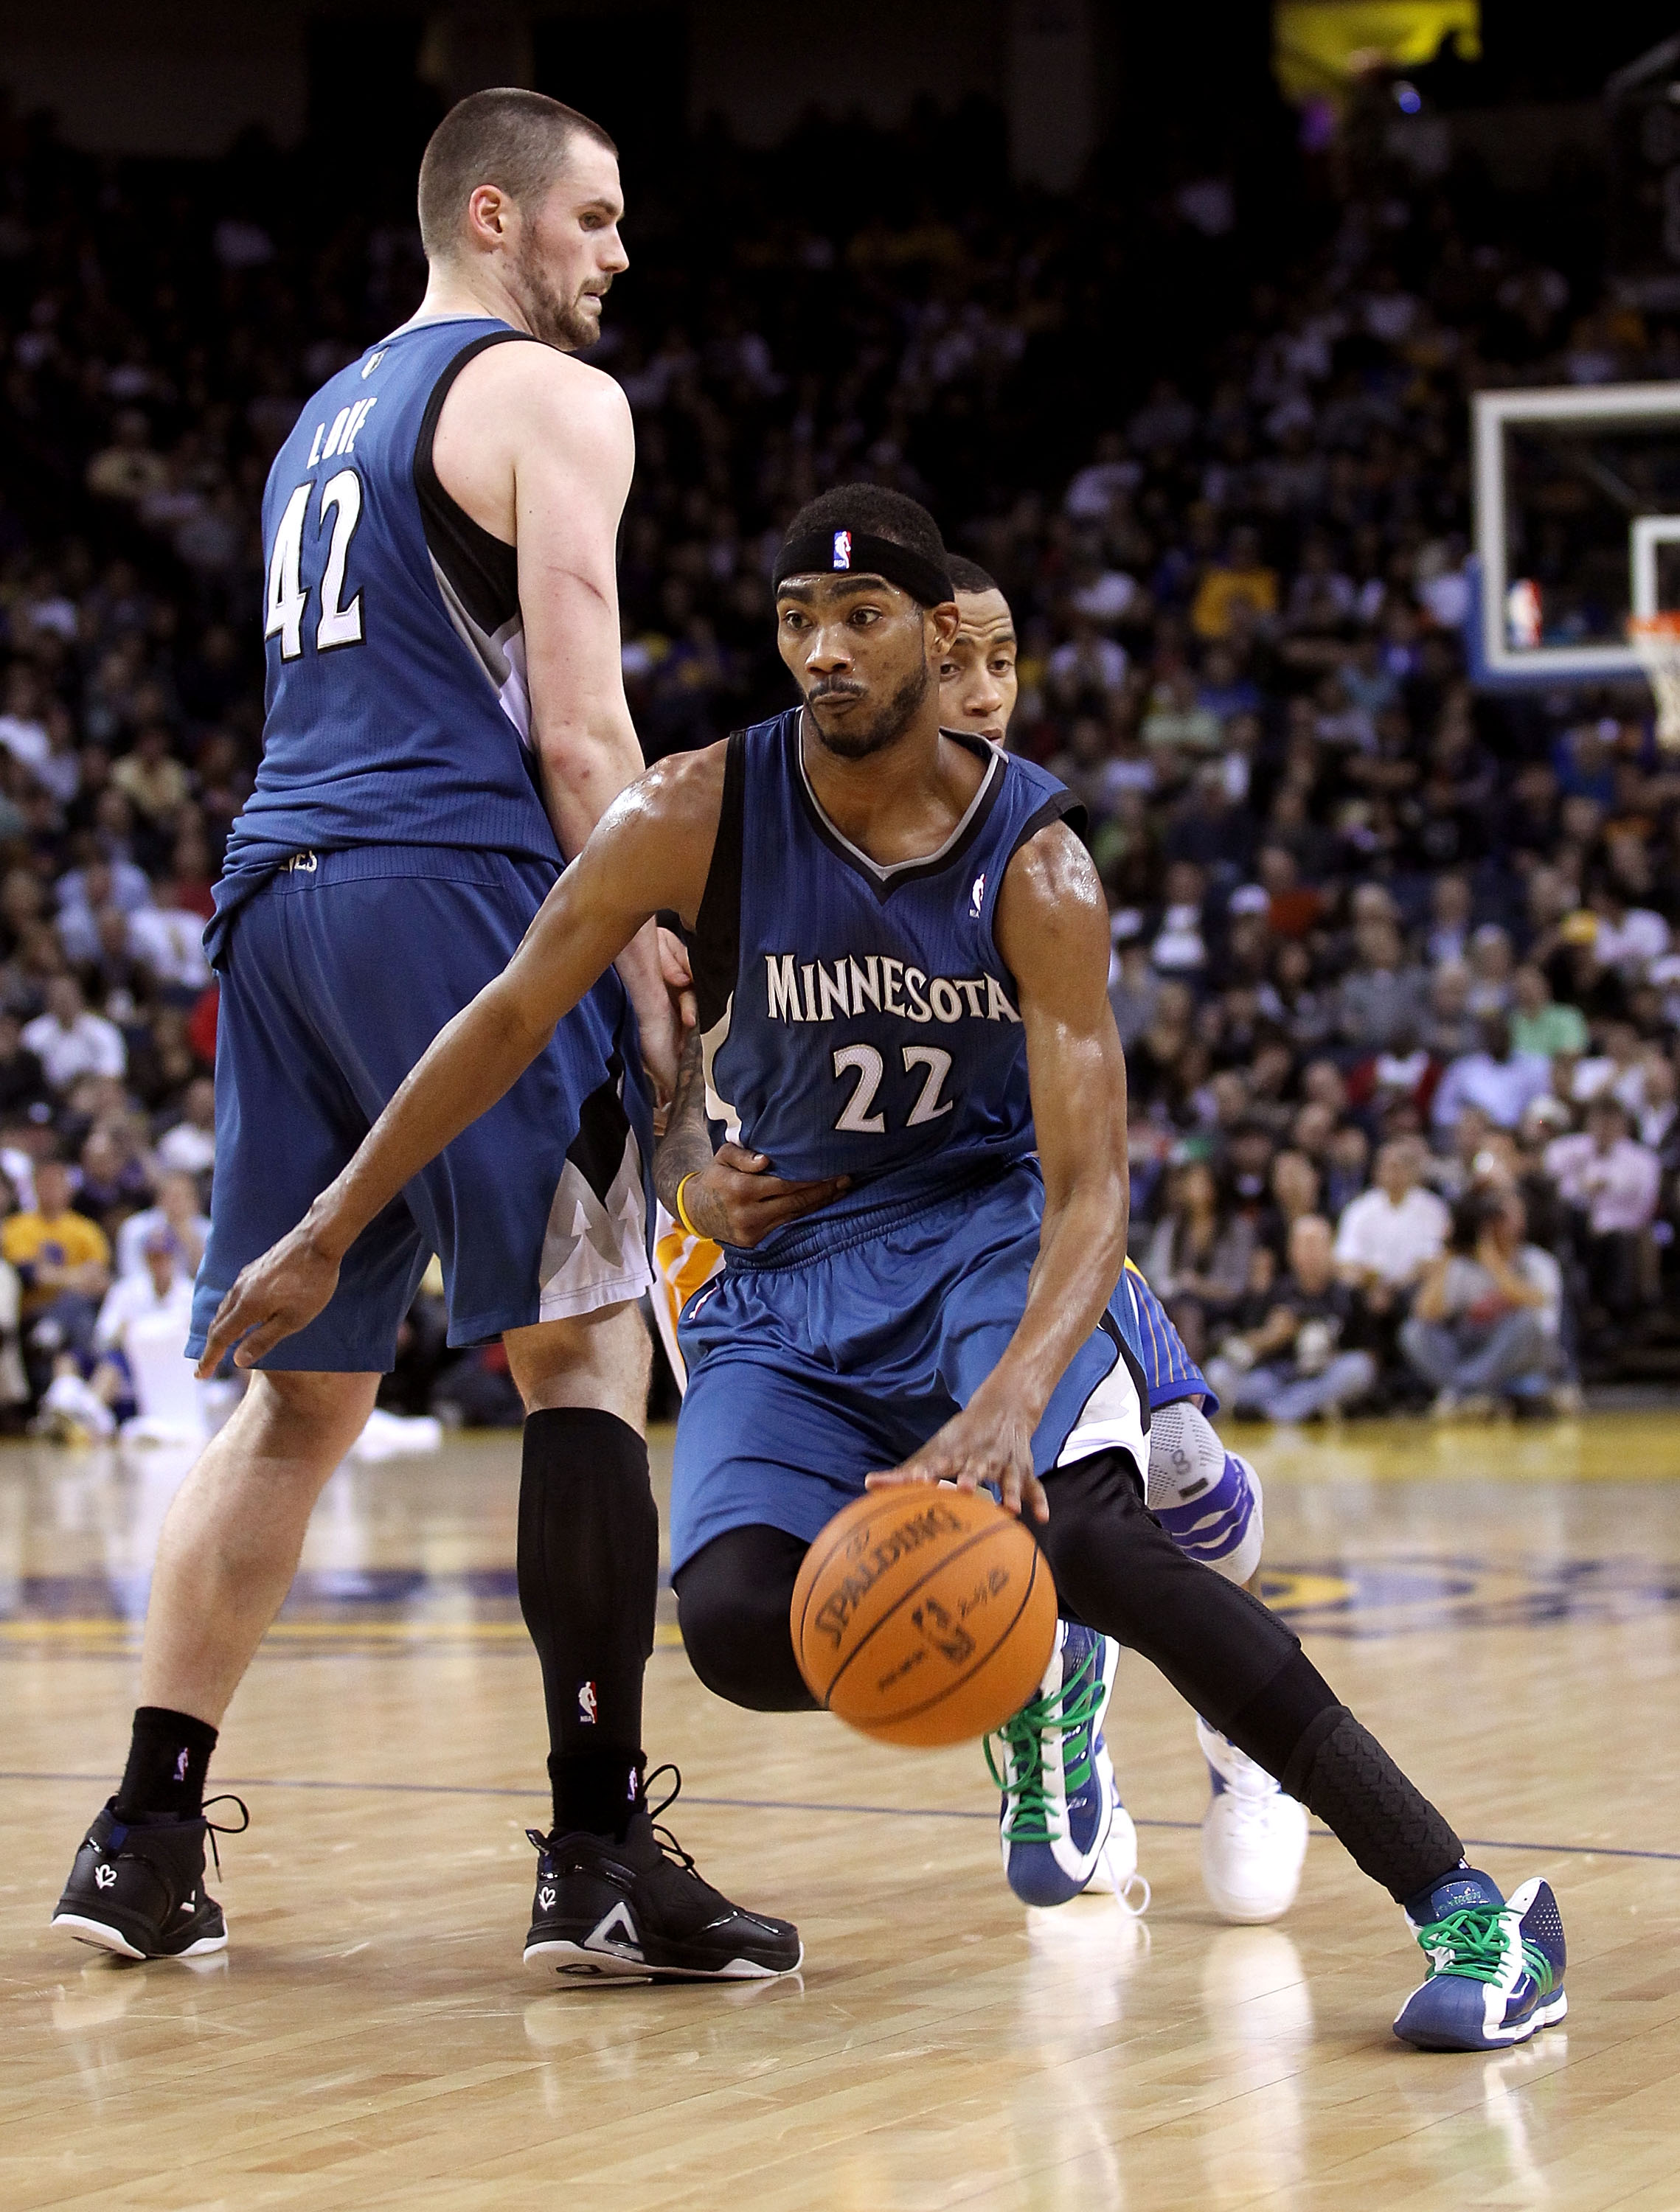 OAKLAND, CA - DECEMBER 14:  Corey Brewer #22 of the Minnesota Timberwolves in action against the Golden State Warriors at Oracle Arena on December 14, 2010 in Oakland, California.  NOTE TO USER: User expressly acknowledges and agrees that, by downloading